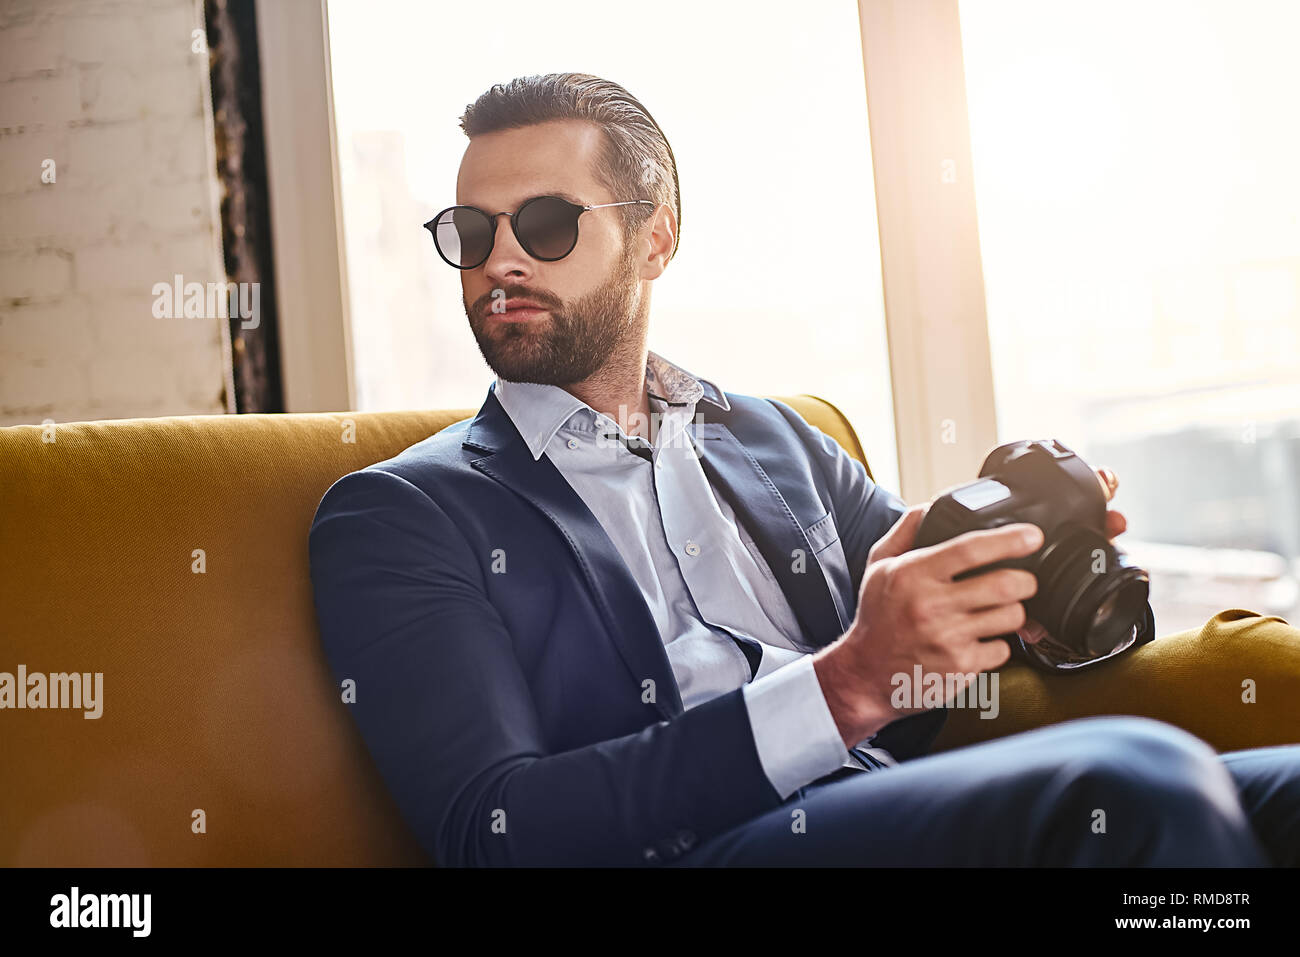 In search of inspiration. Successful young stylish businessman in sunglasses, is holding photo camera and thinking about something. Business style. Fashion look Stock Photo